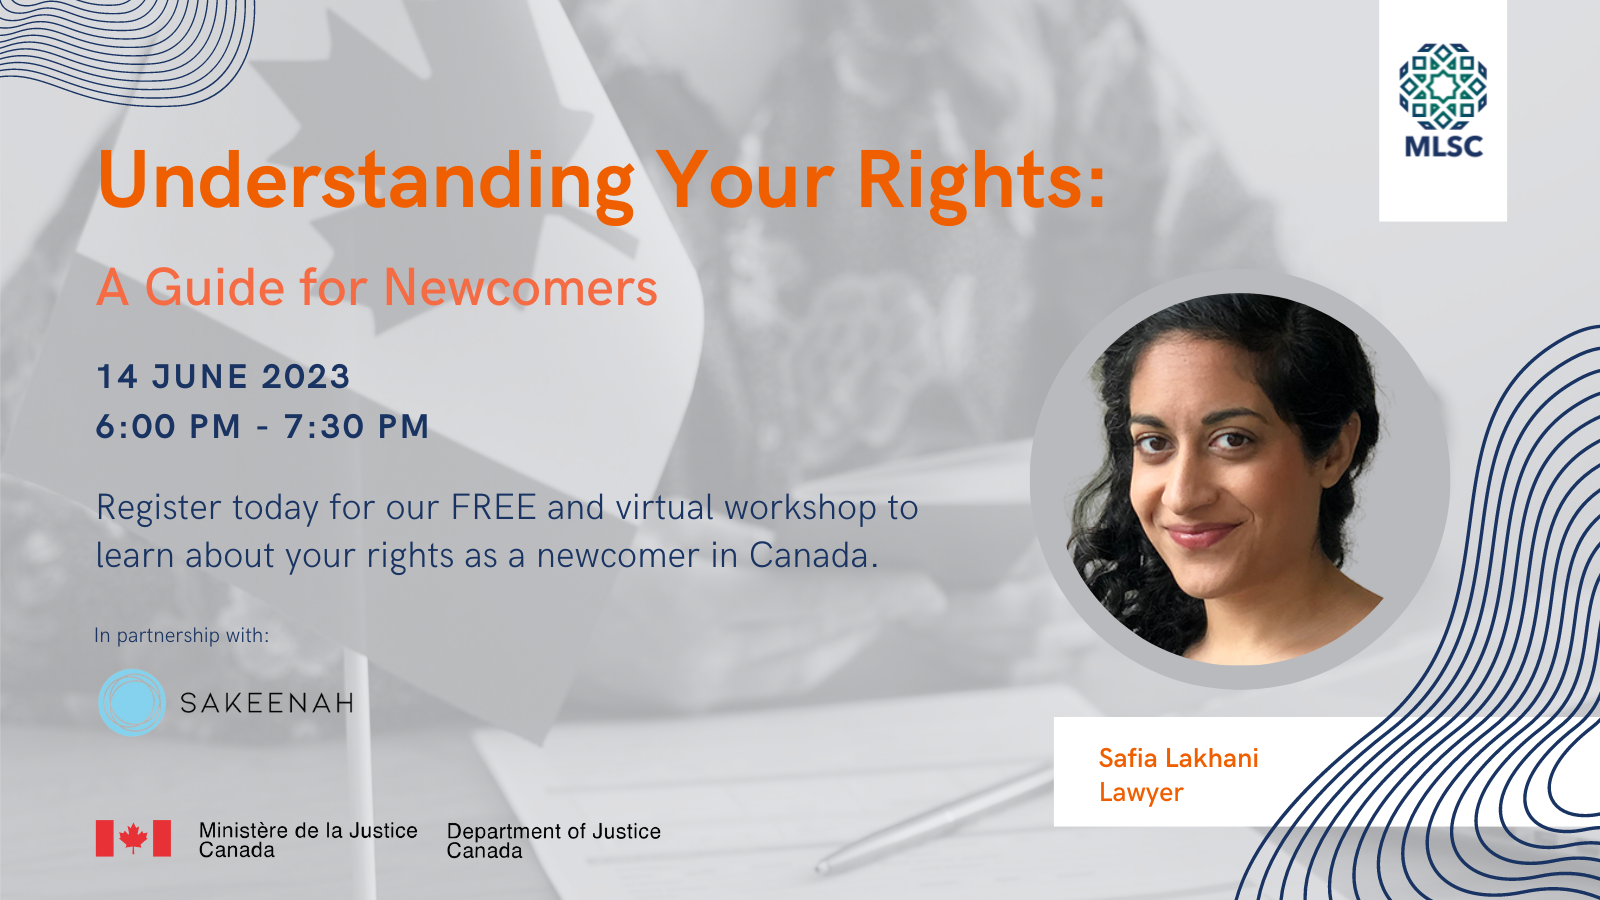 Muslim Legal Support Centre (MLSC): Understanding Your Rights: A Guide for Newcomers